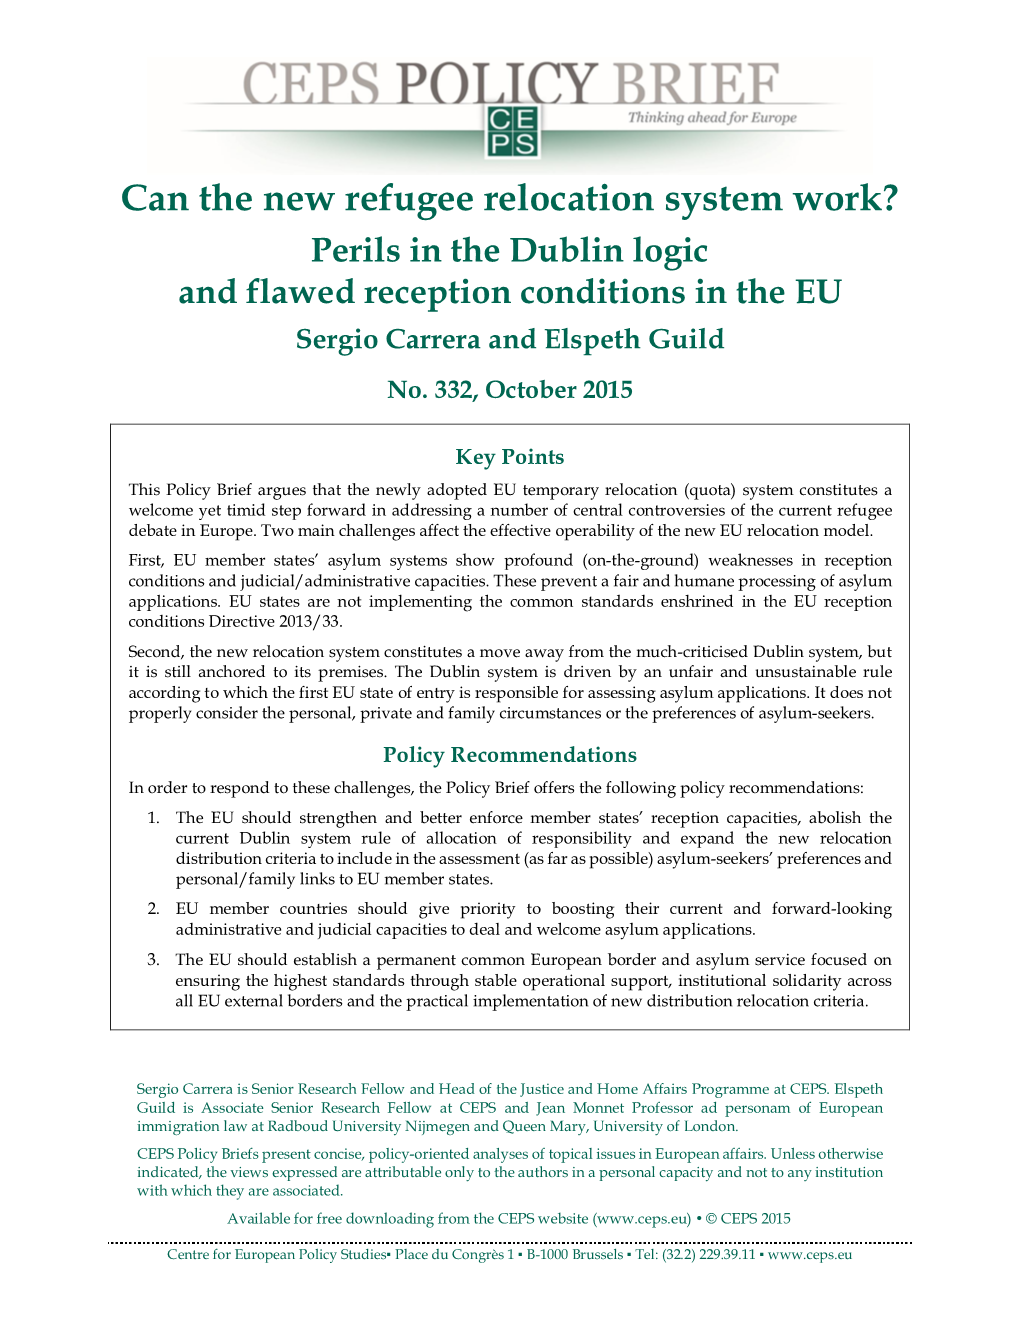 Can the New Refugee Relocation System Work? Perils in the Dublin Logic and Flawed Reception Conditions in the EU Sergio Carrera and Elspeth Guild No